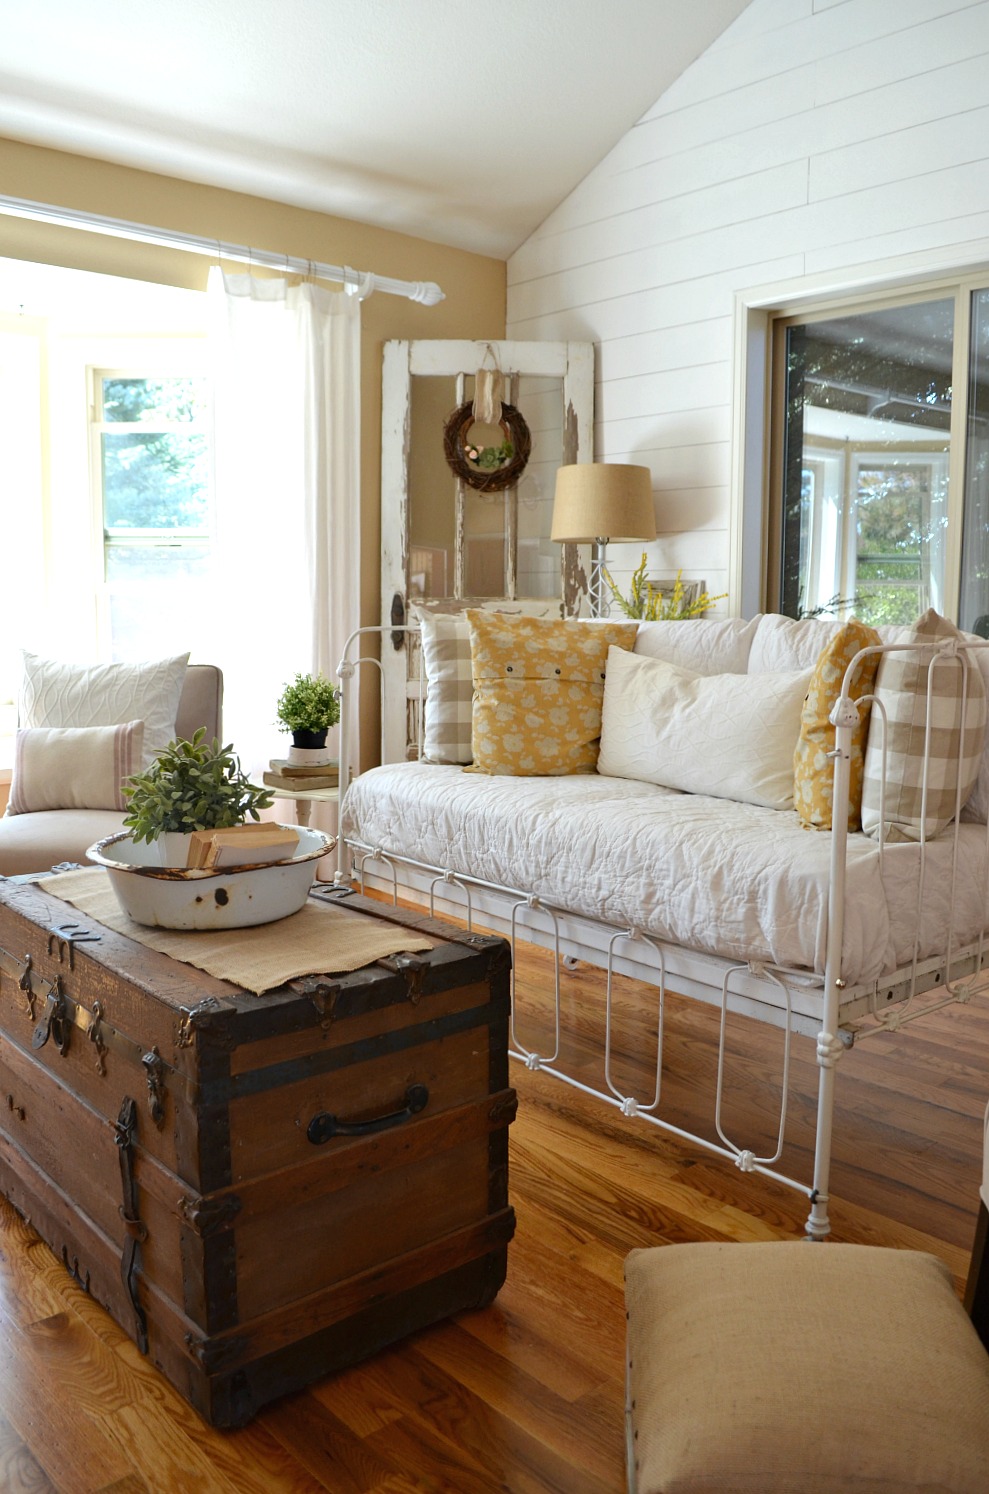 Couch made from an old crib - love this idea and all the other great ideas in this post, too!